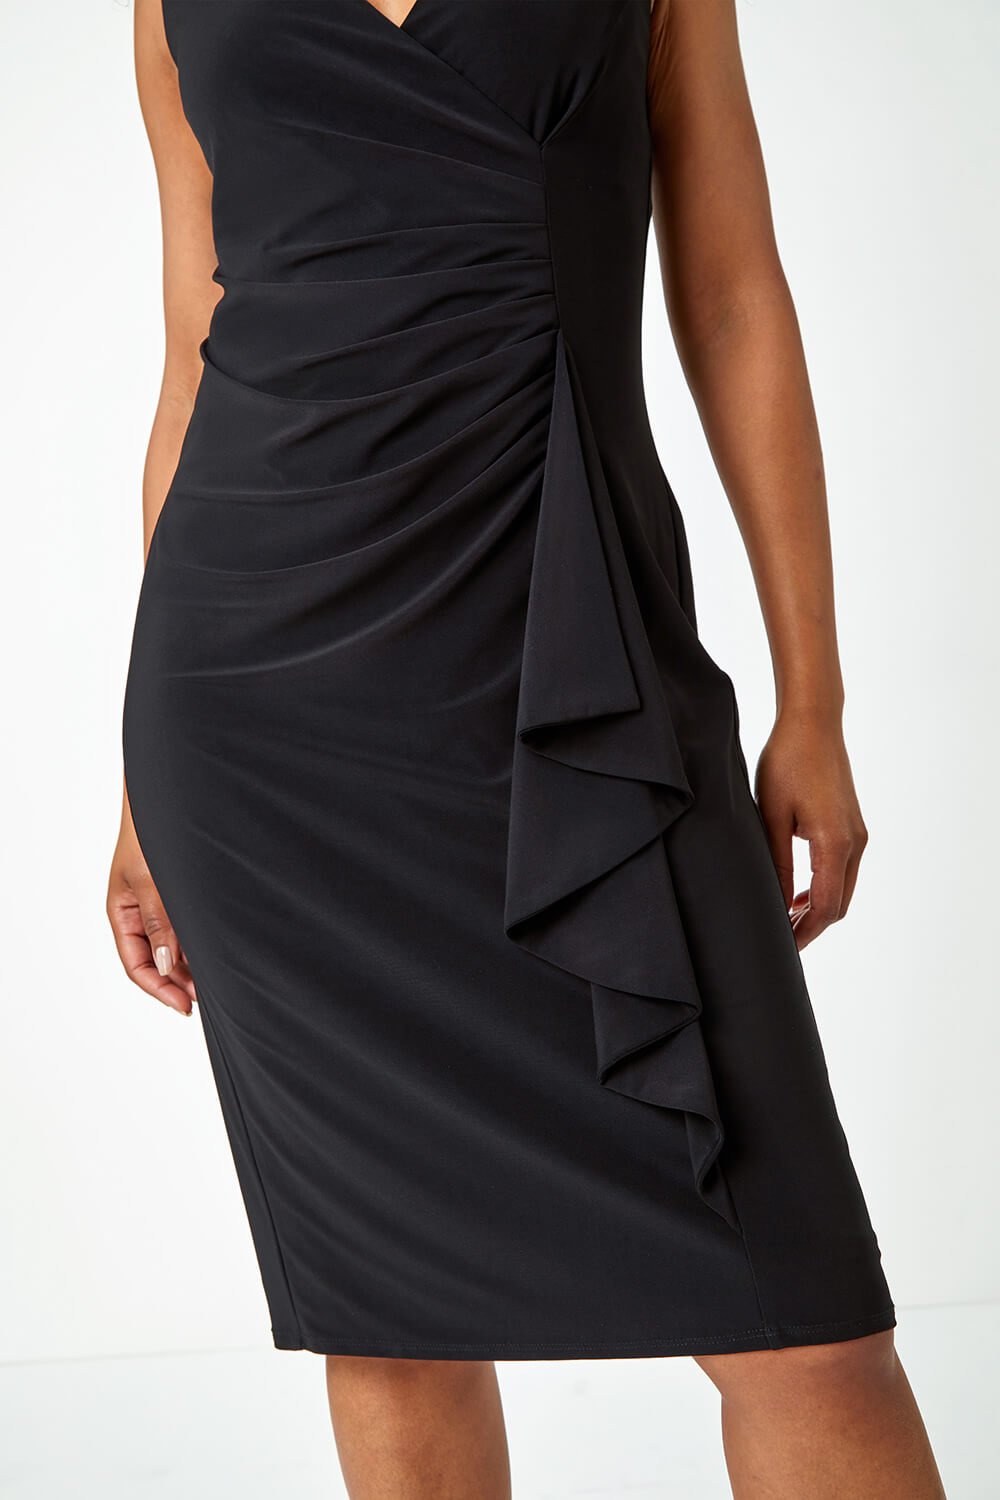 Black Petite Ruched Waterfall Stretch Dress, Image 5 of 5